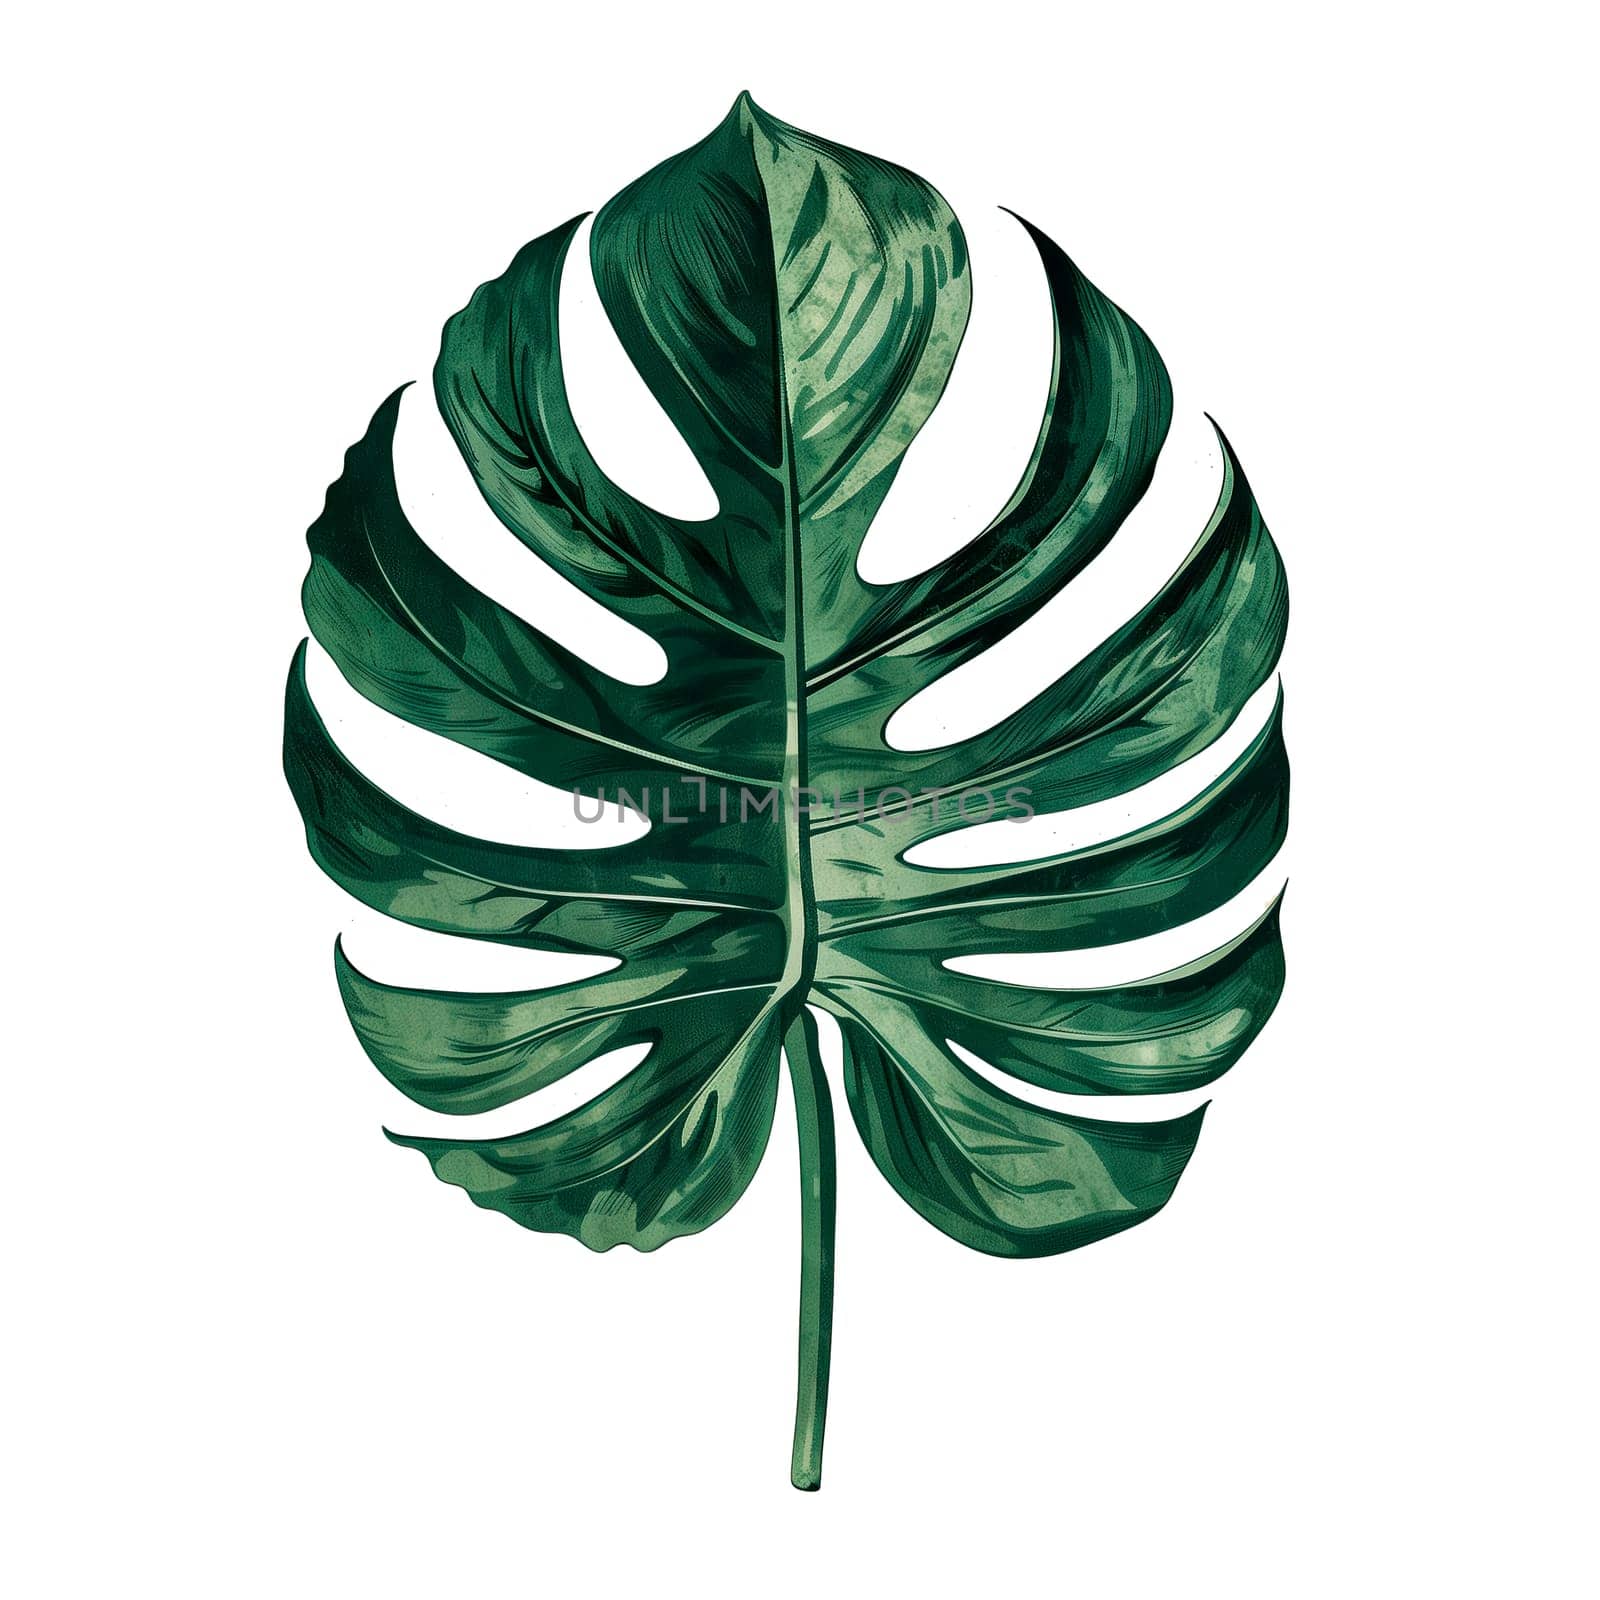 Isolated illustration of monstera leaf by Dustick